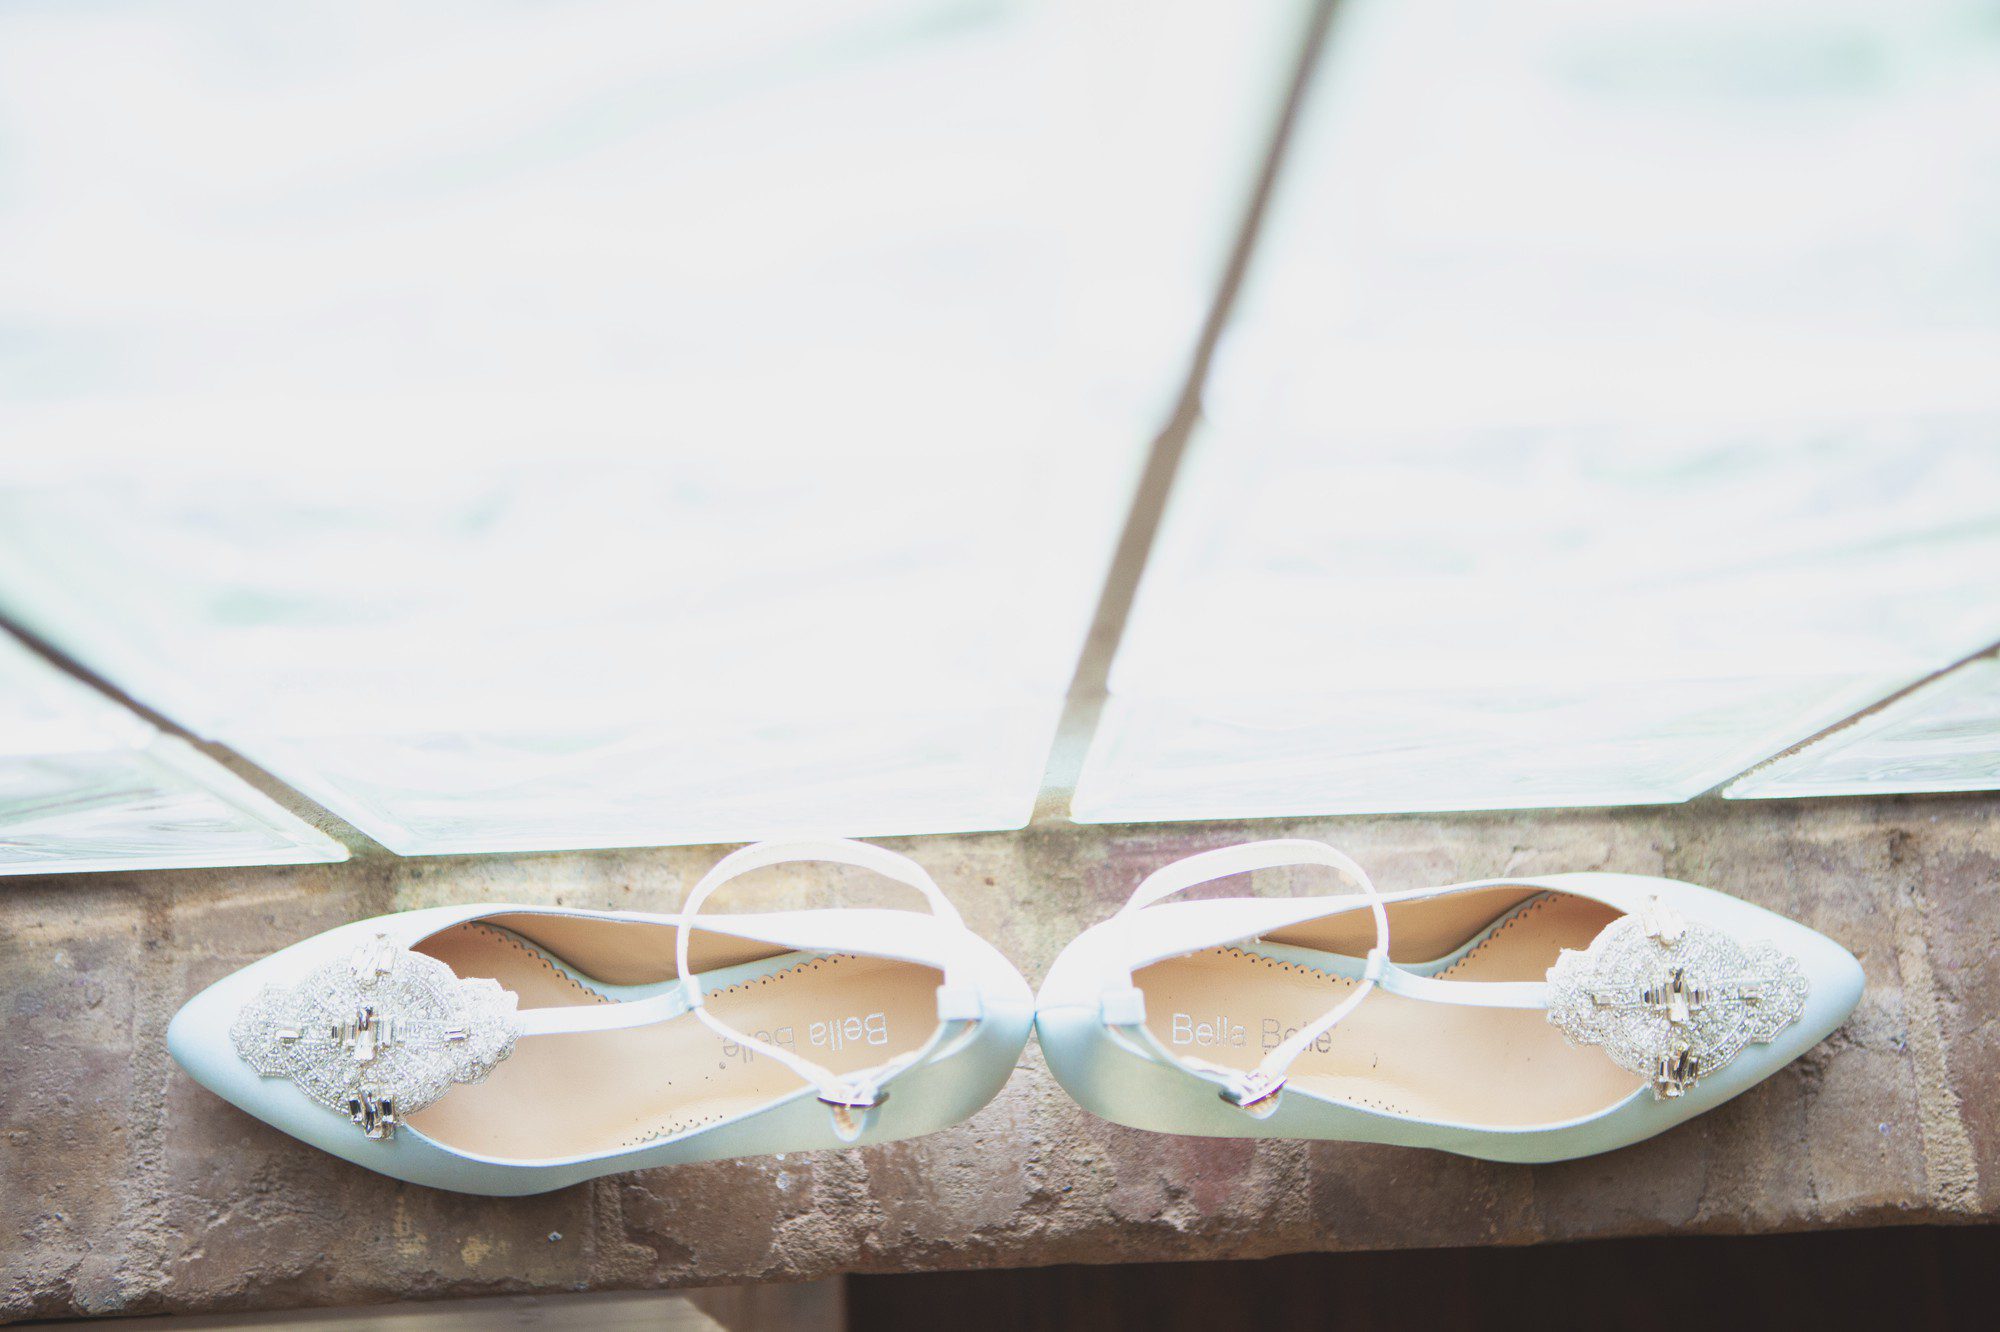 Bride's gorgeous pale blue shoes beside the vintage window at McConnell House in Franklin, TN before wedding ceremony. Photos by Krista Lee Photography Nashville, TN